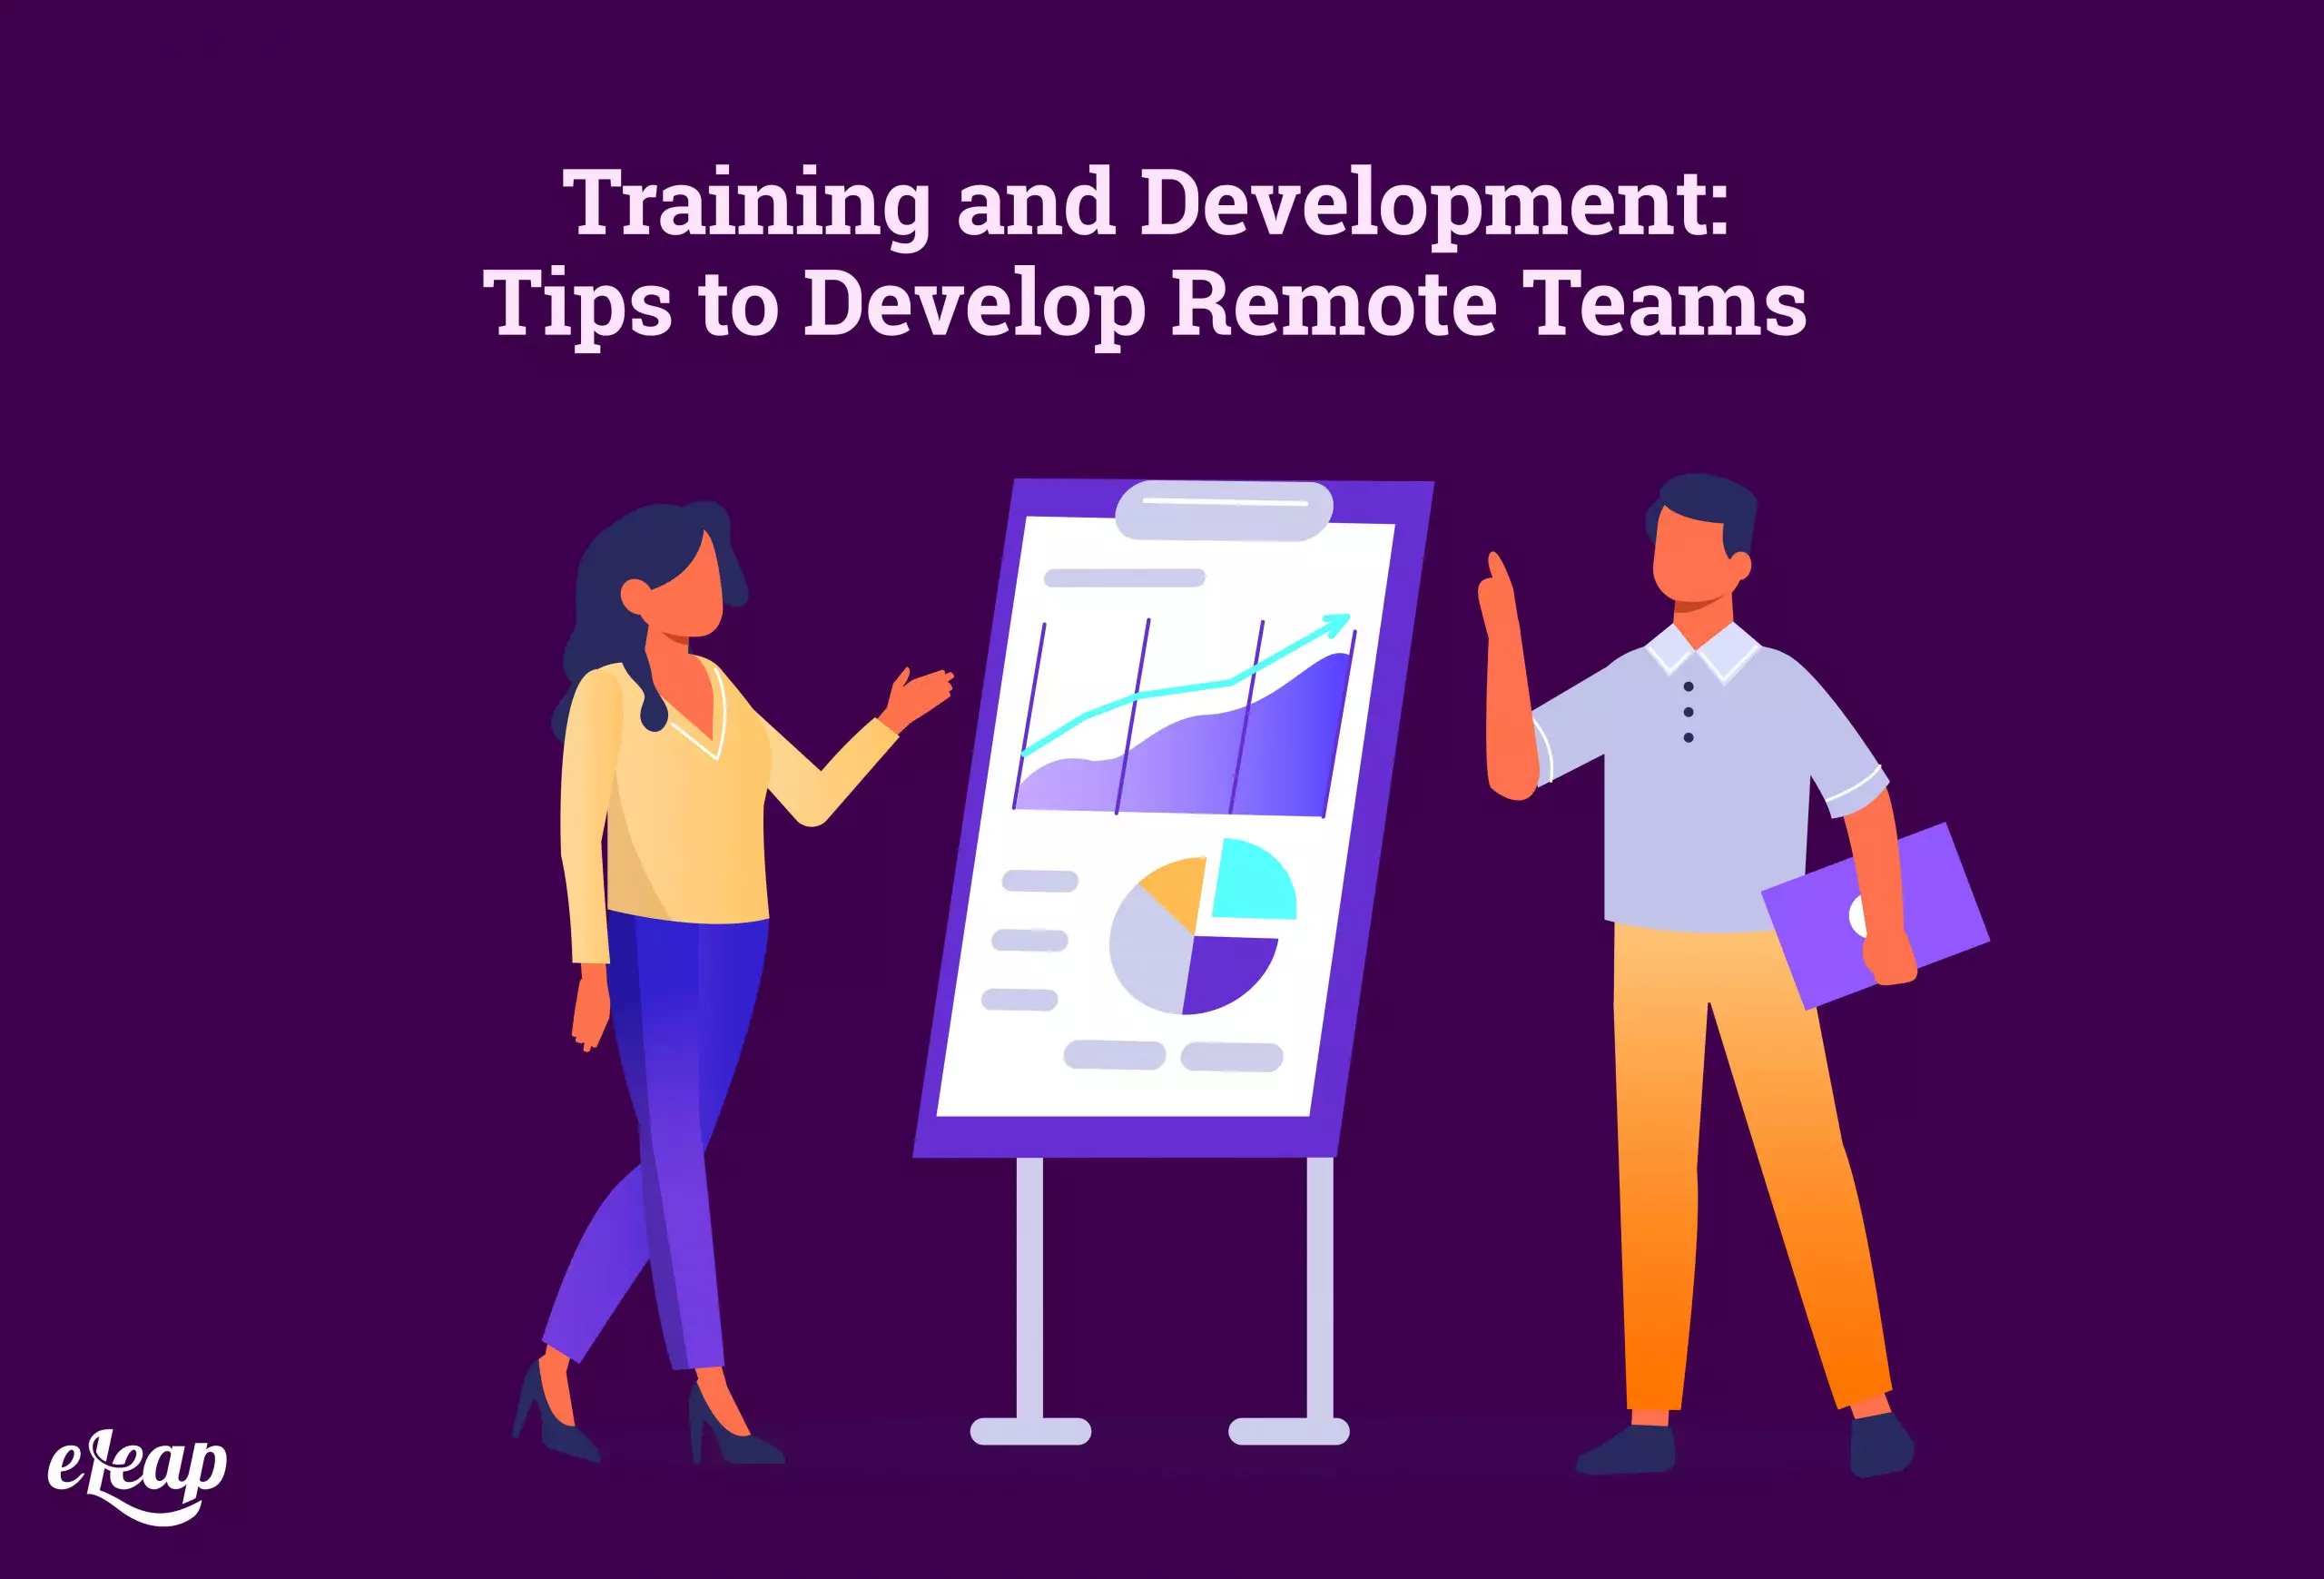 Training and Development: Tips to Develop Remote Teams